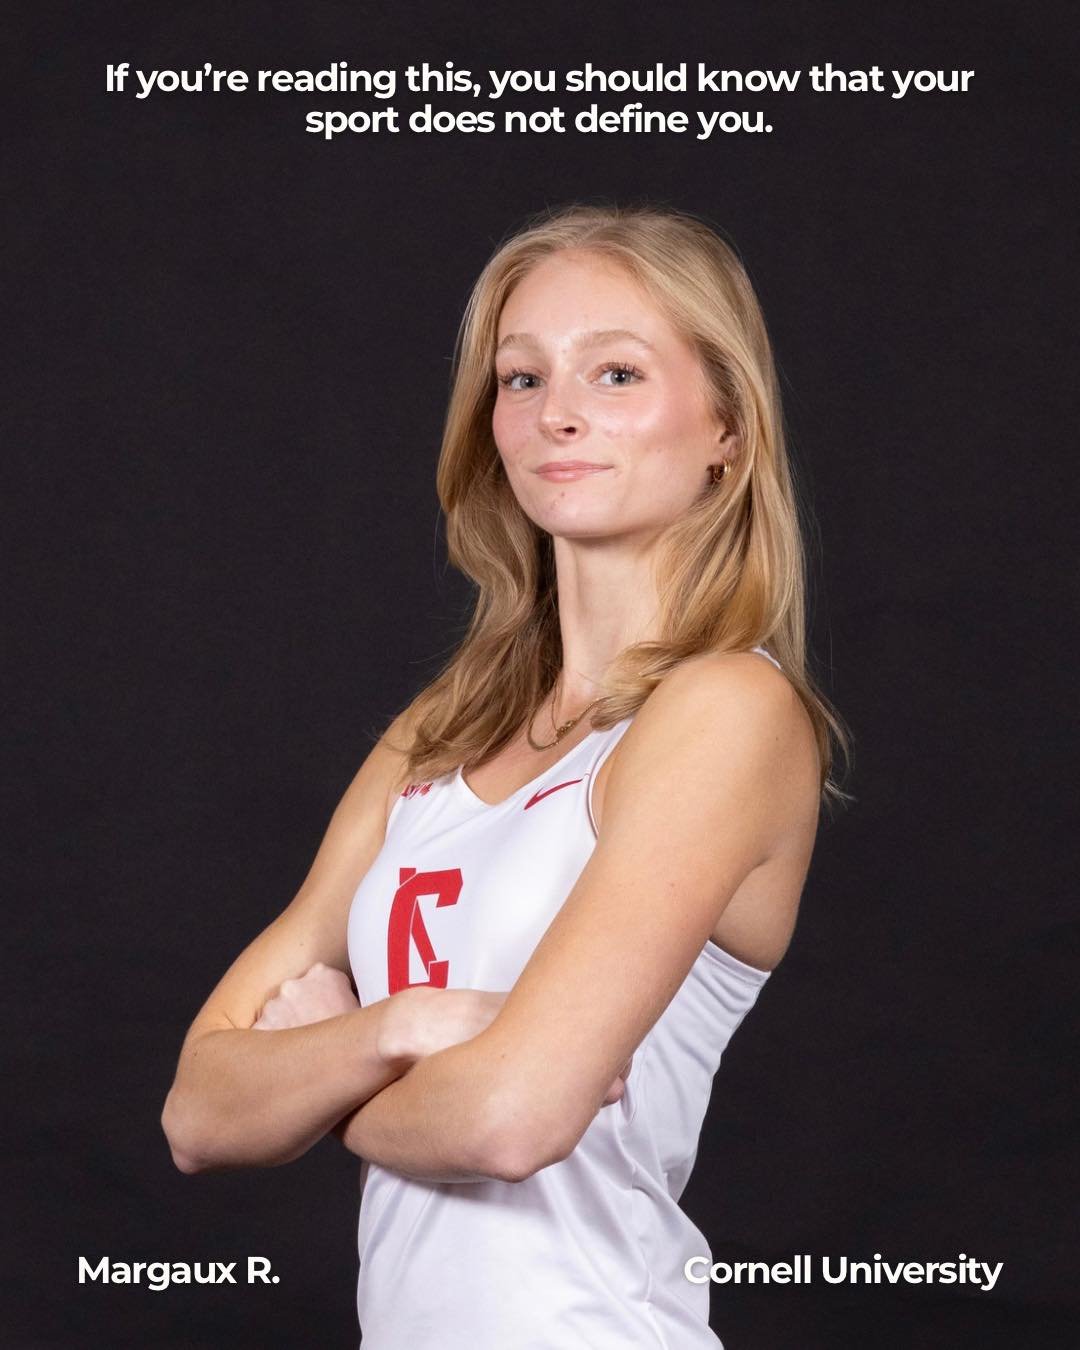 &quot;If you're reading this, you should know that your sport does not define you.&quot; 

Margaux, a track and field athlete at Cornell University, shares a letter as part of our student athlete series, acknowledging that each athlete is on their ow